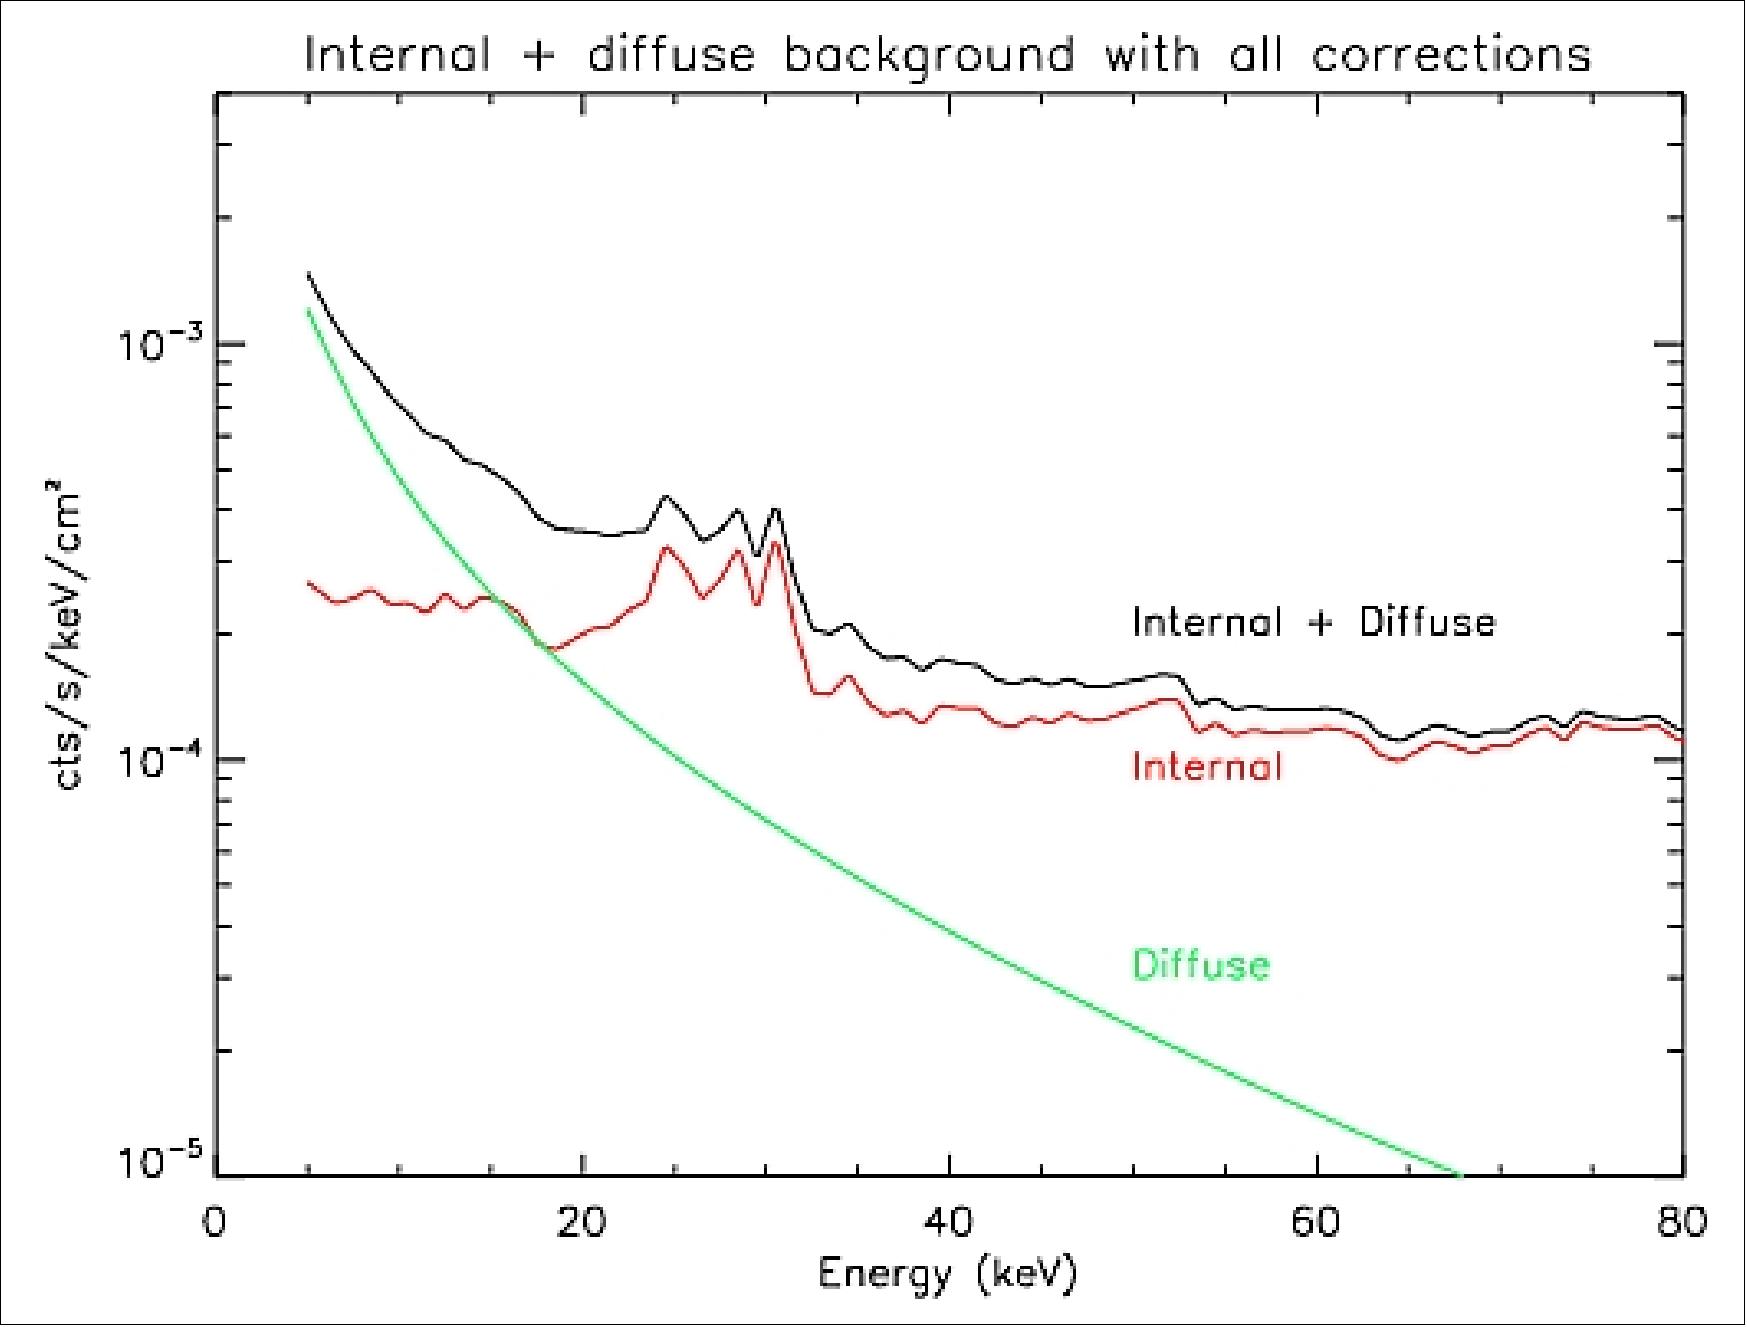 Figure 58: Predicted detector background count rate per unit area as a function of energy (image credit: NuSTAR collaboration)